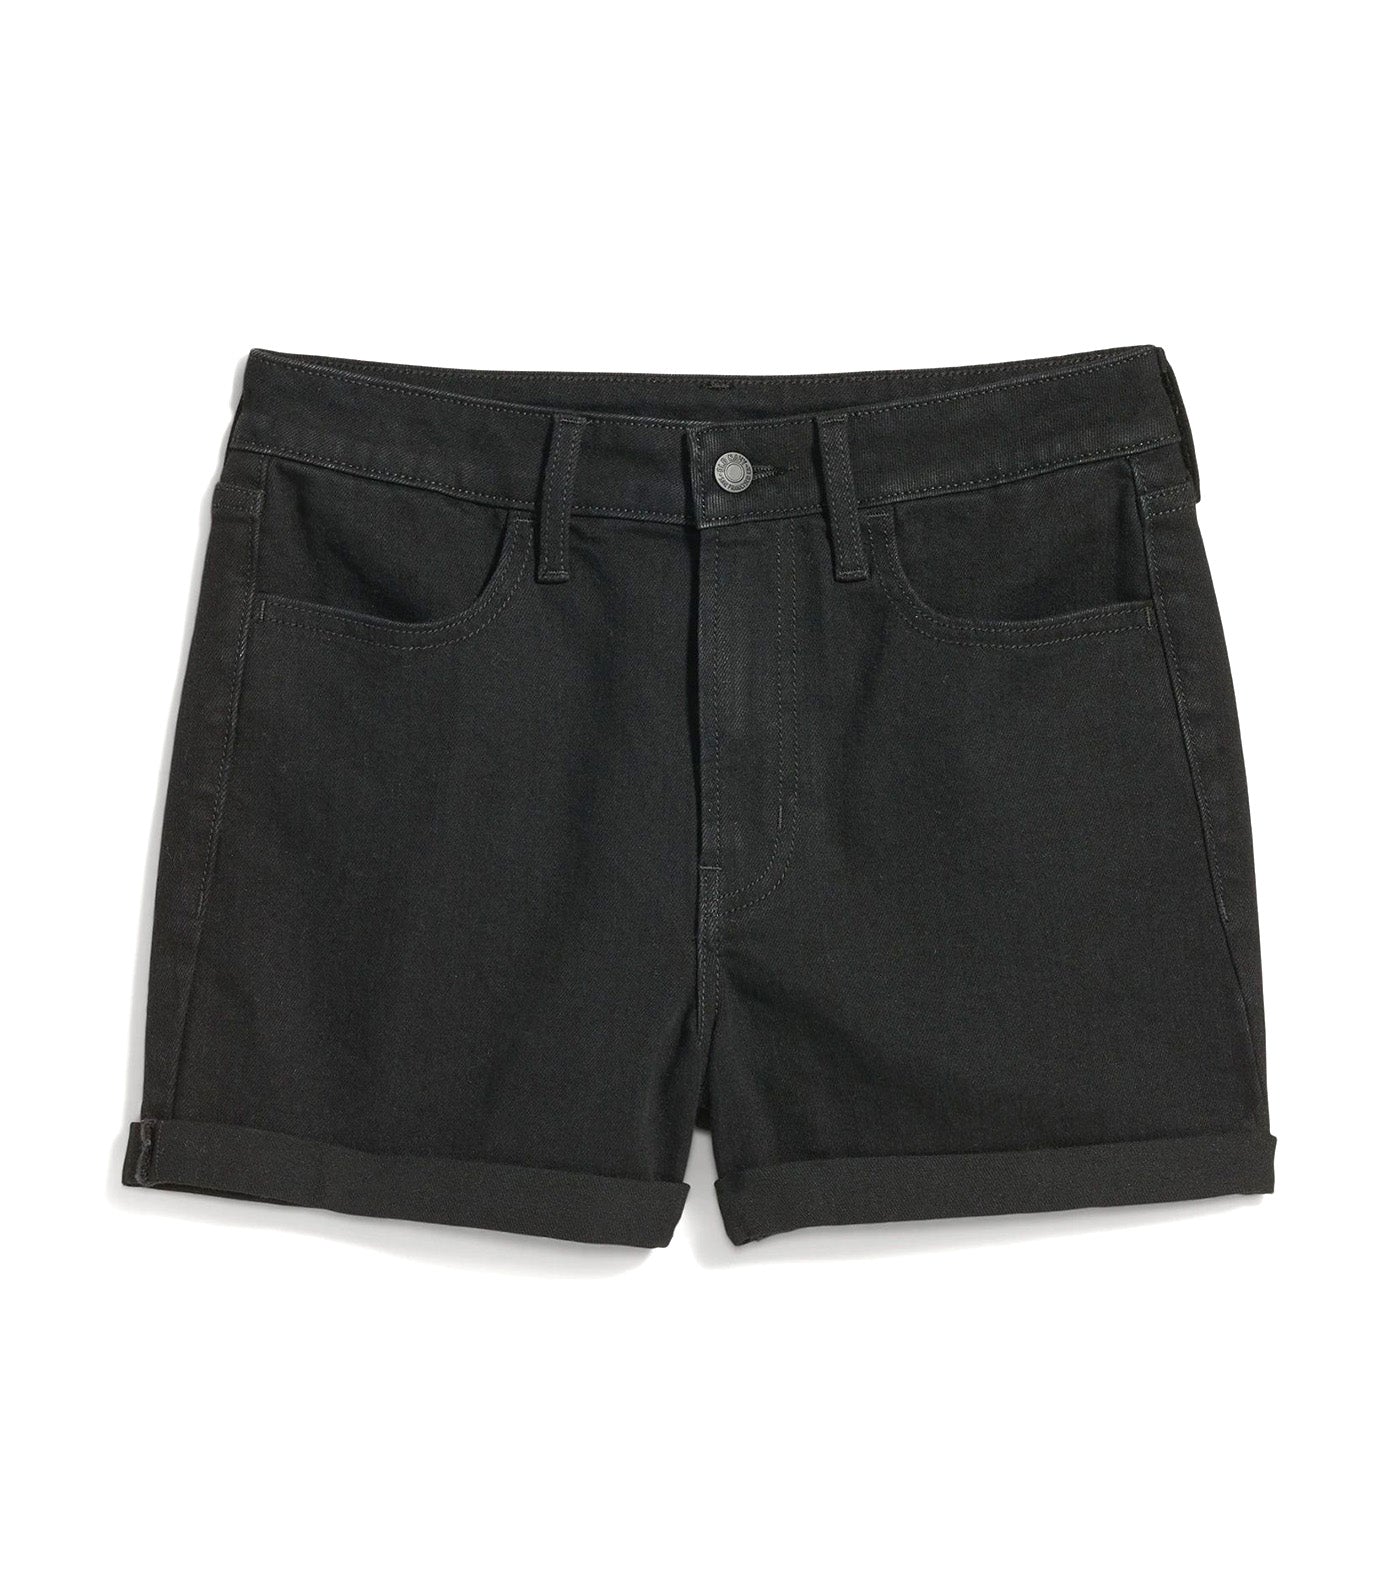 High-Waisted Wow Black-Wash Jean Shorts for Women Black Jack